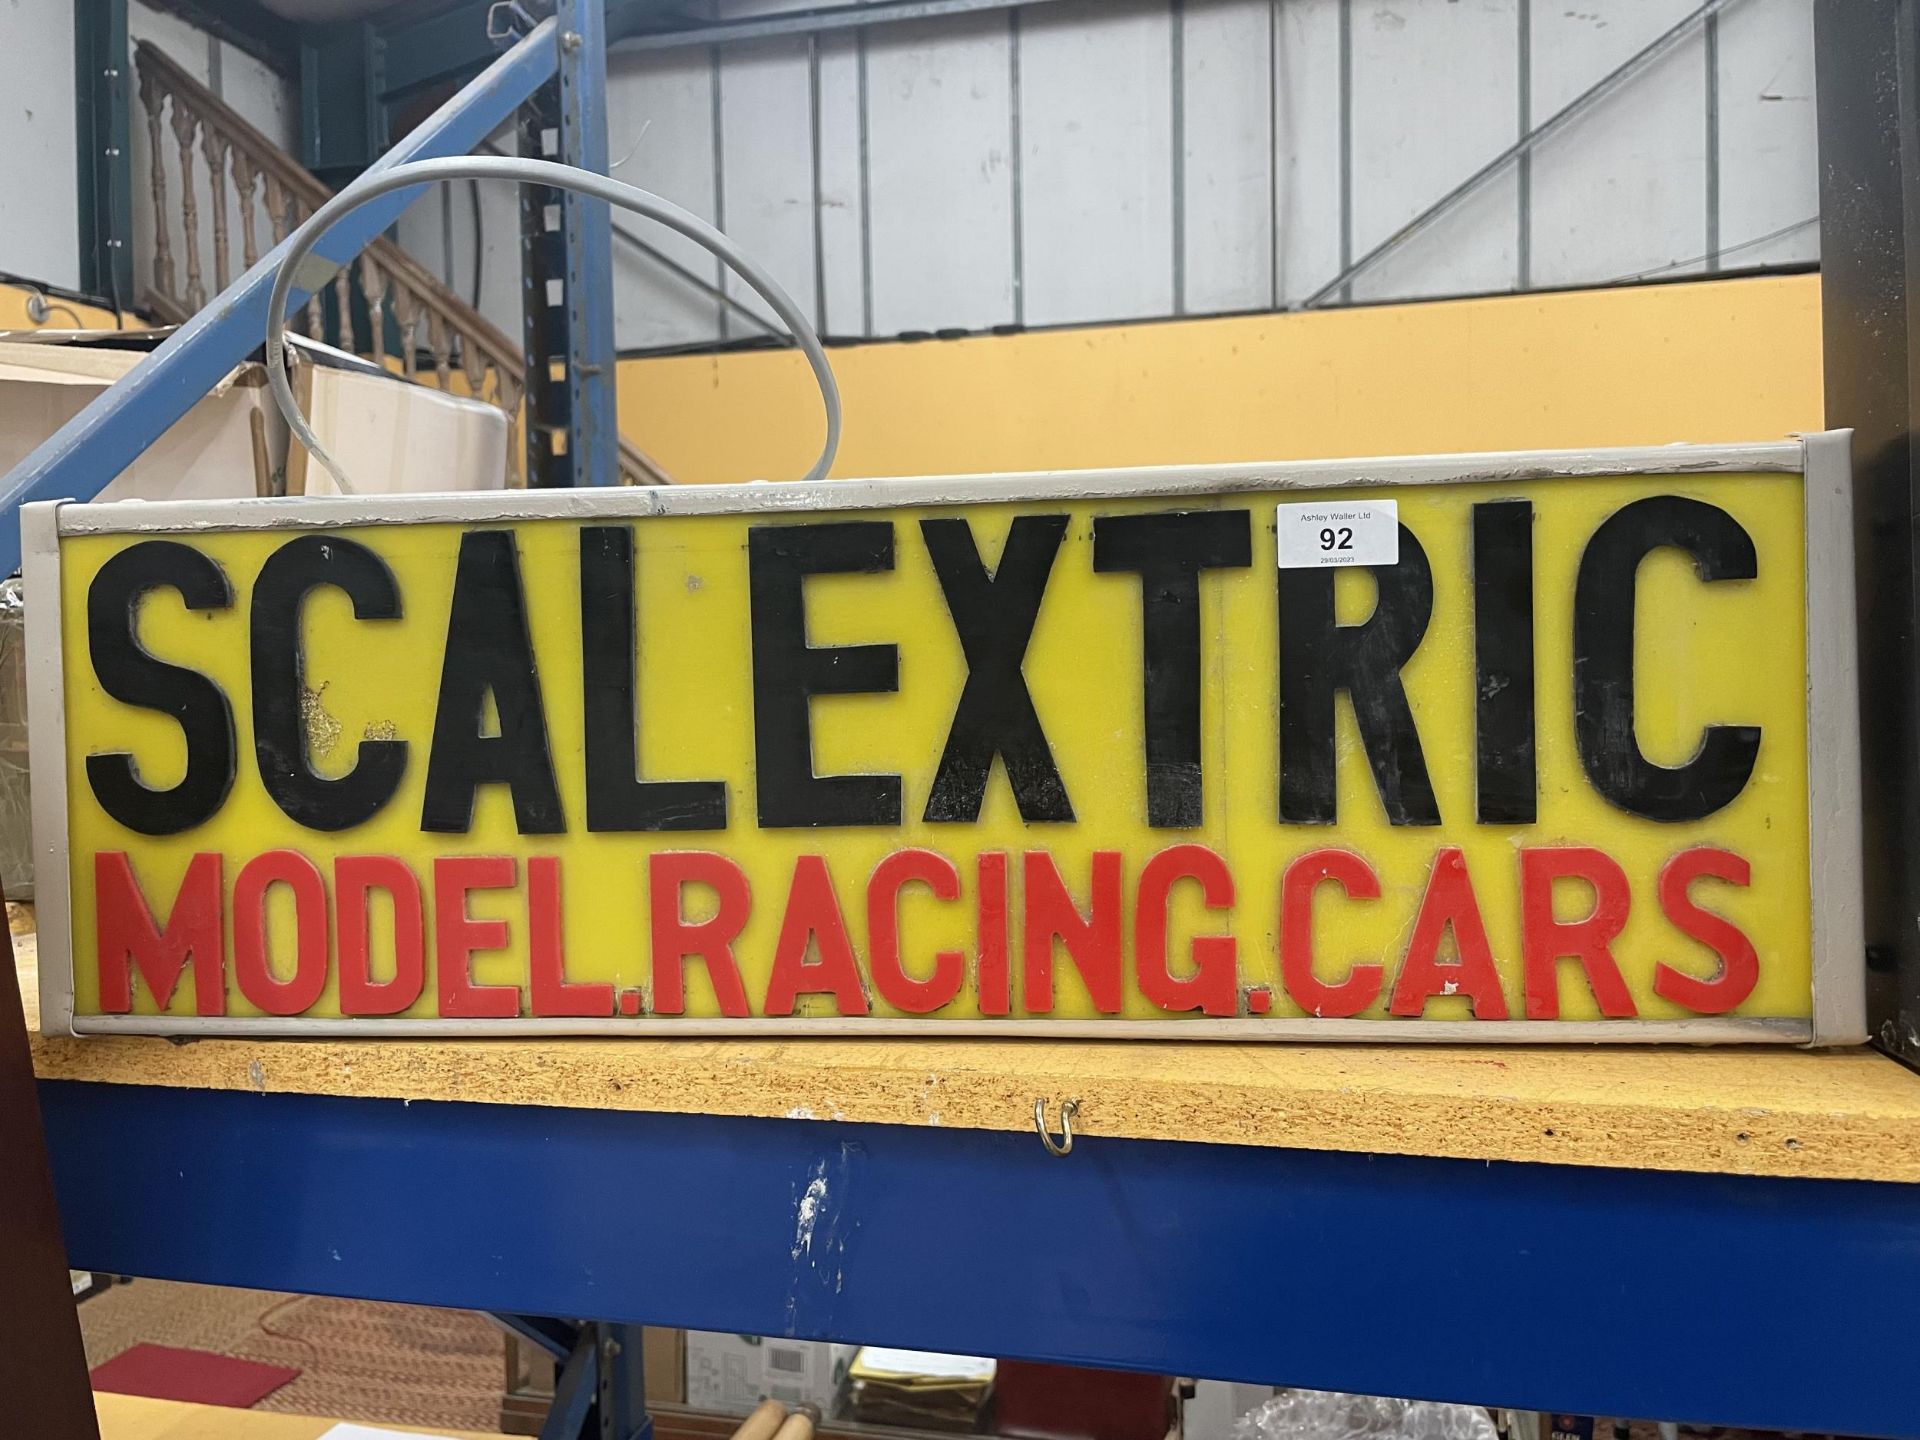 A SCALEXTRIC MODEL RACING CARS ILLUMINATED BOX SIGN